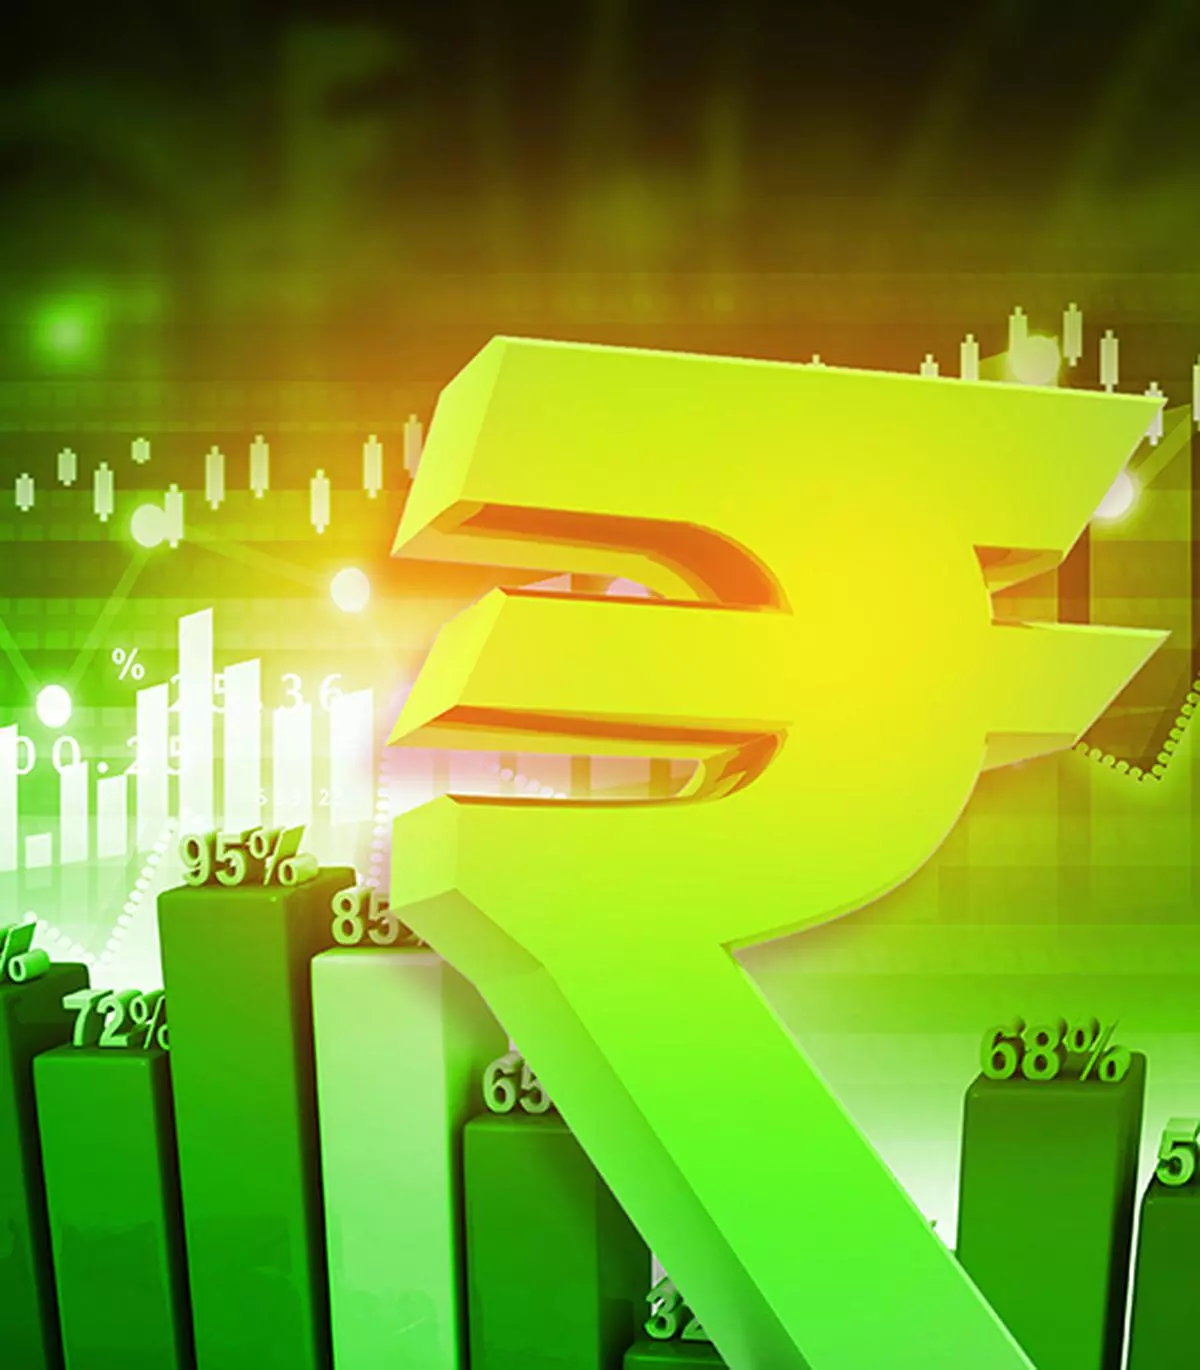 INR remains the best performing Asian currency over the past week